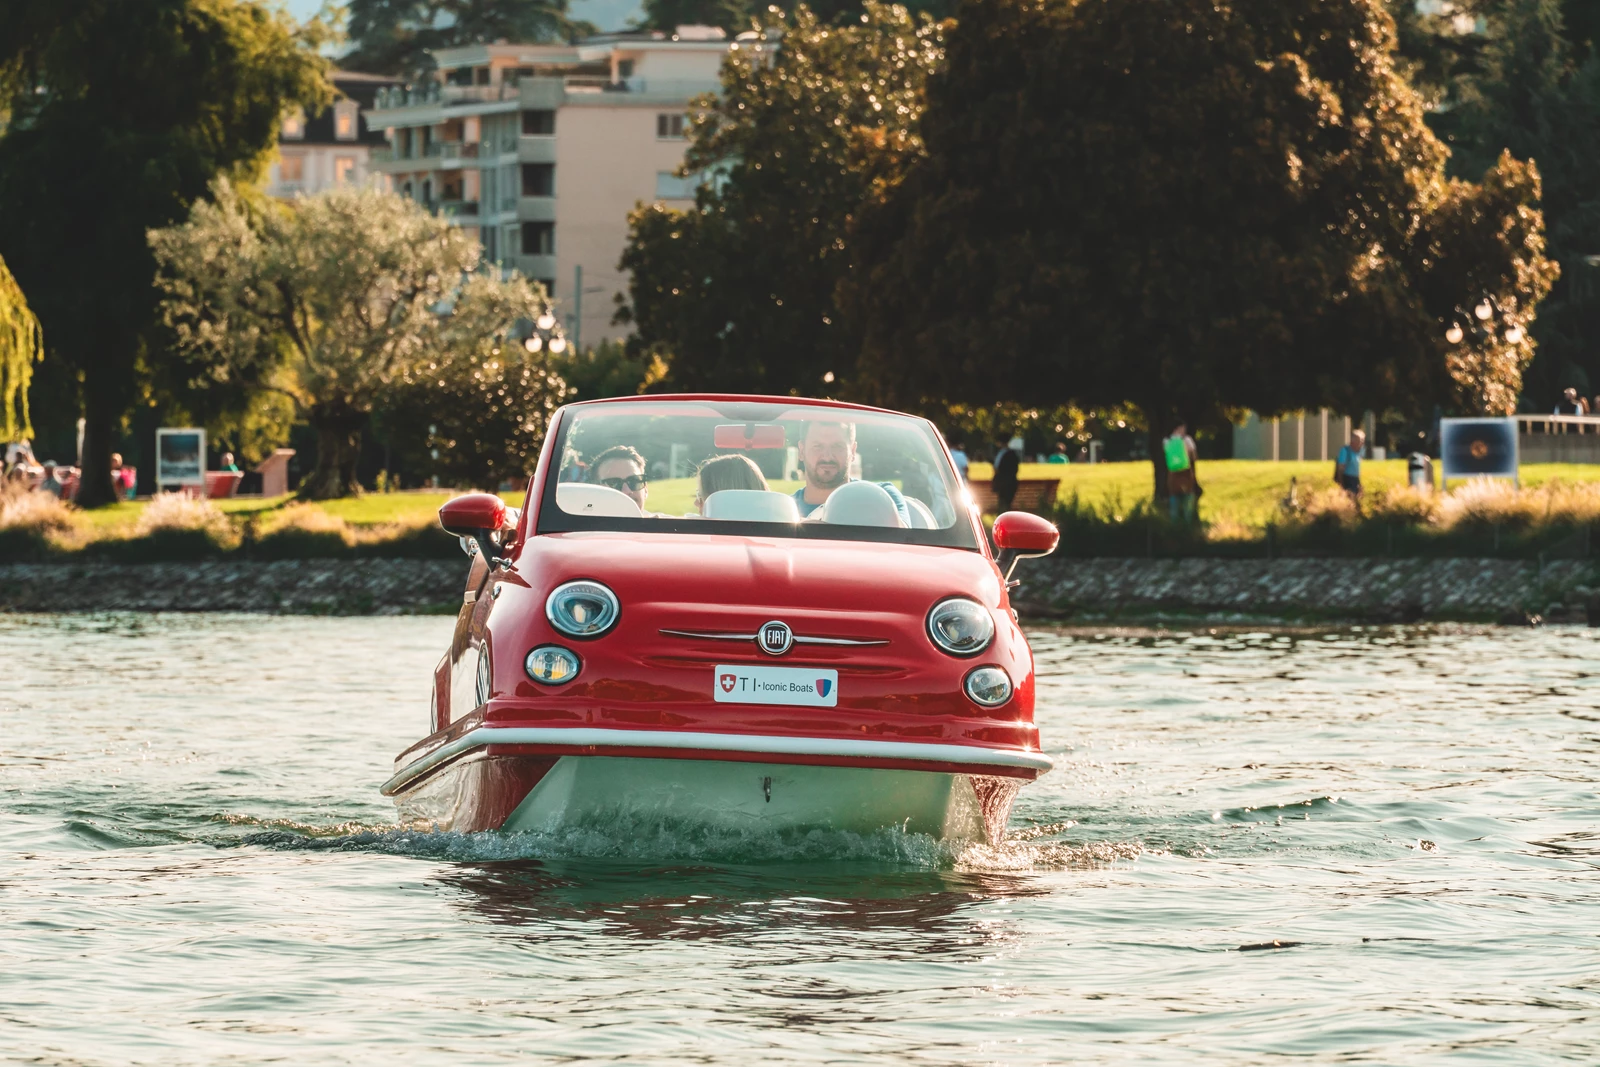 Fiat 500 boat driving around in the water